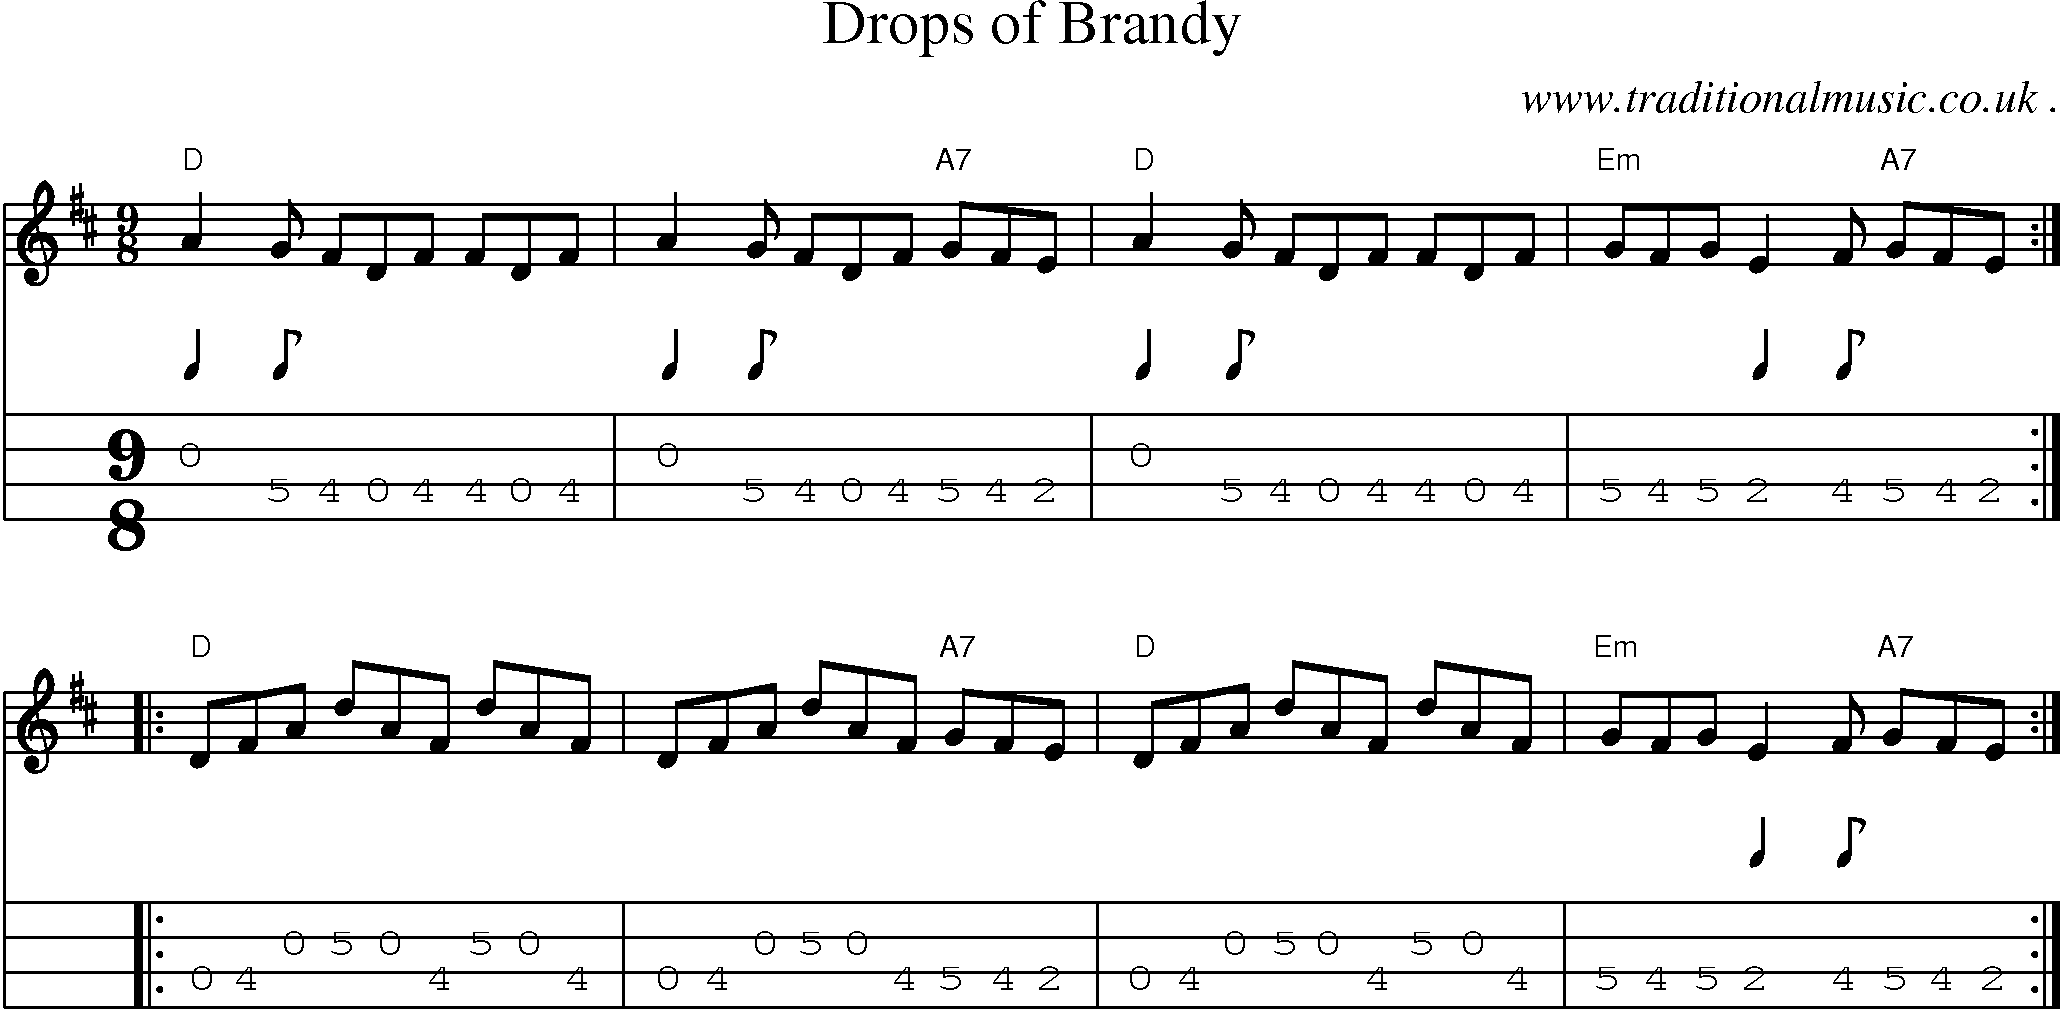 Music Score and Guitar Tabs for Drops of Brandy